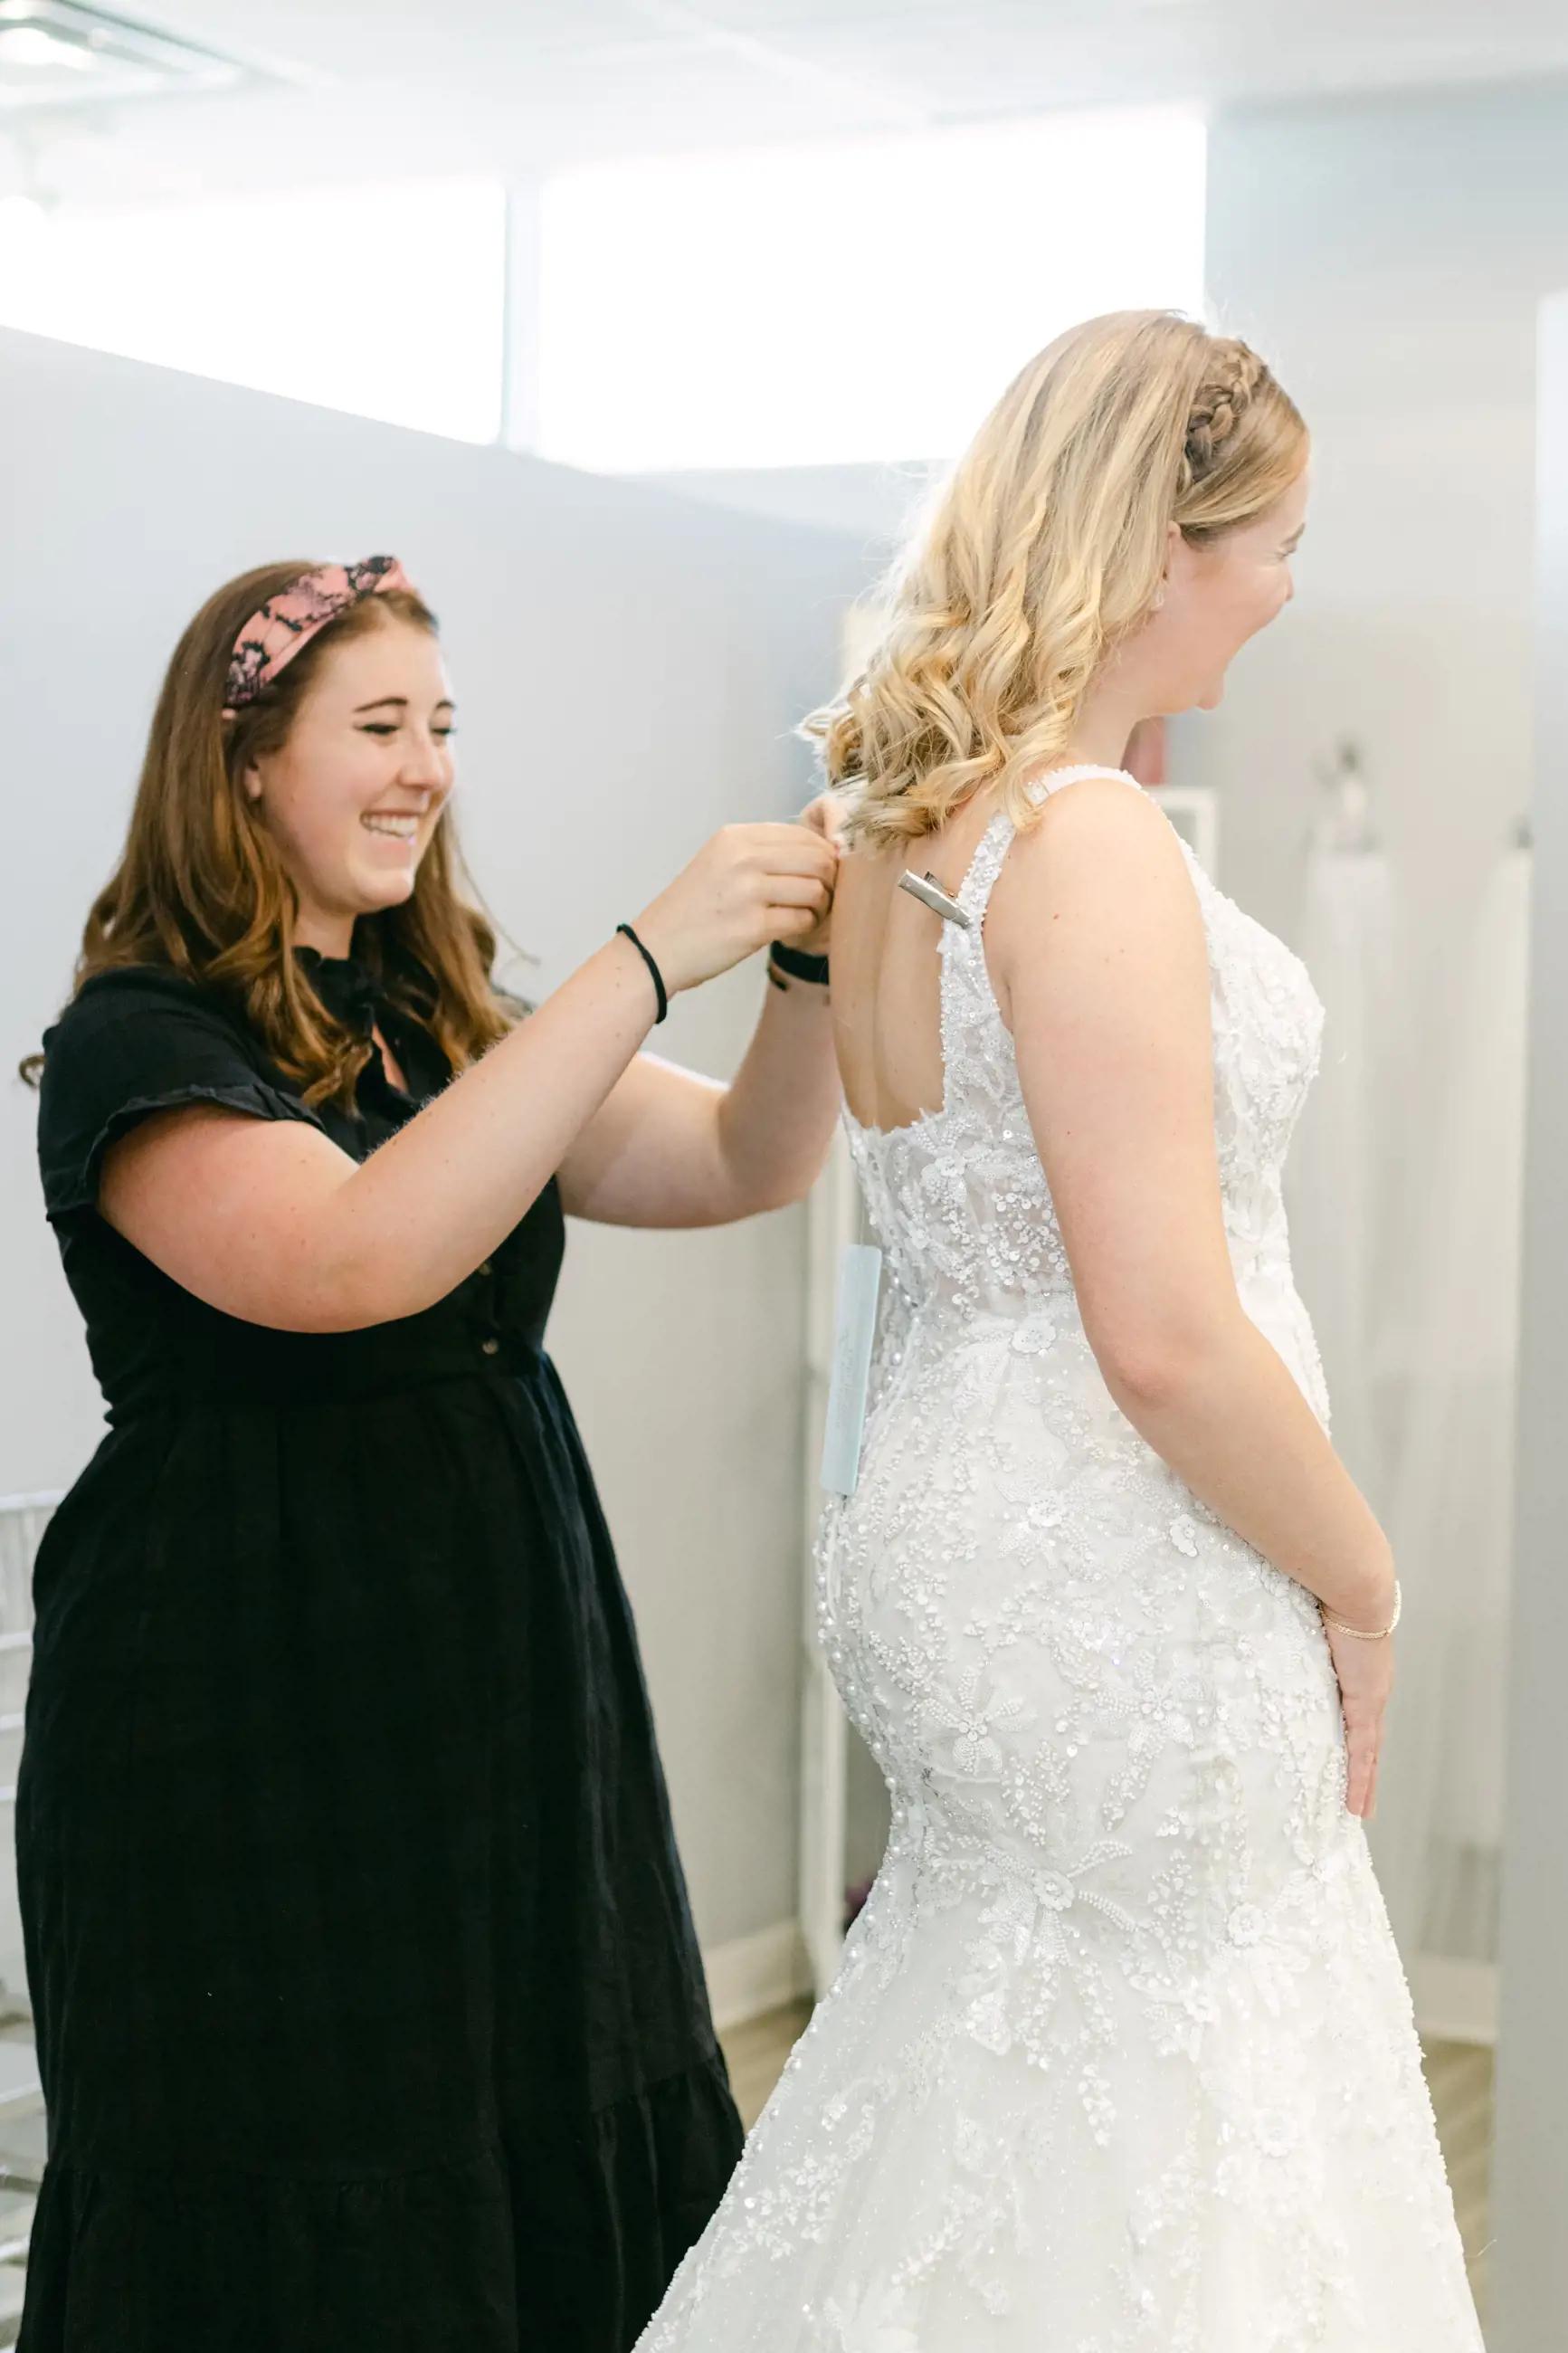 Lace Bridal Experience #6 - Mobile Image